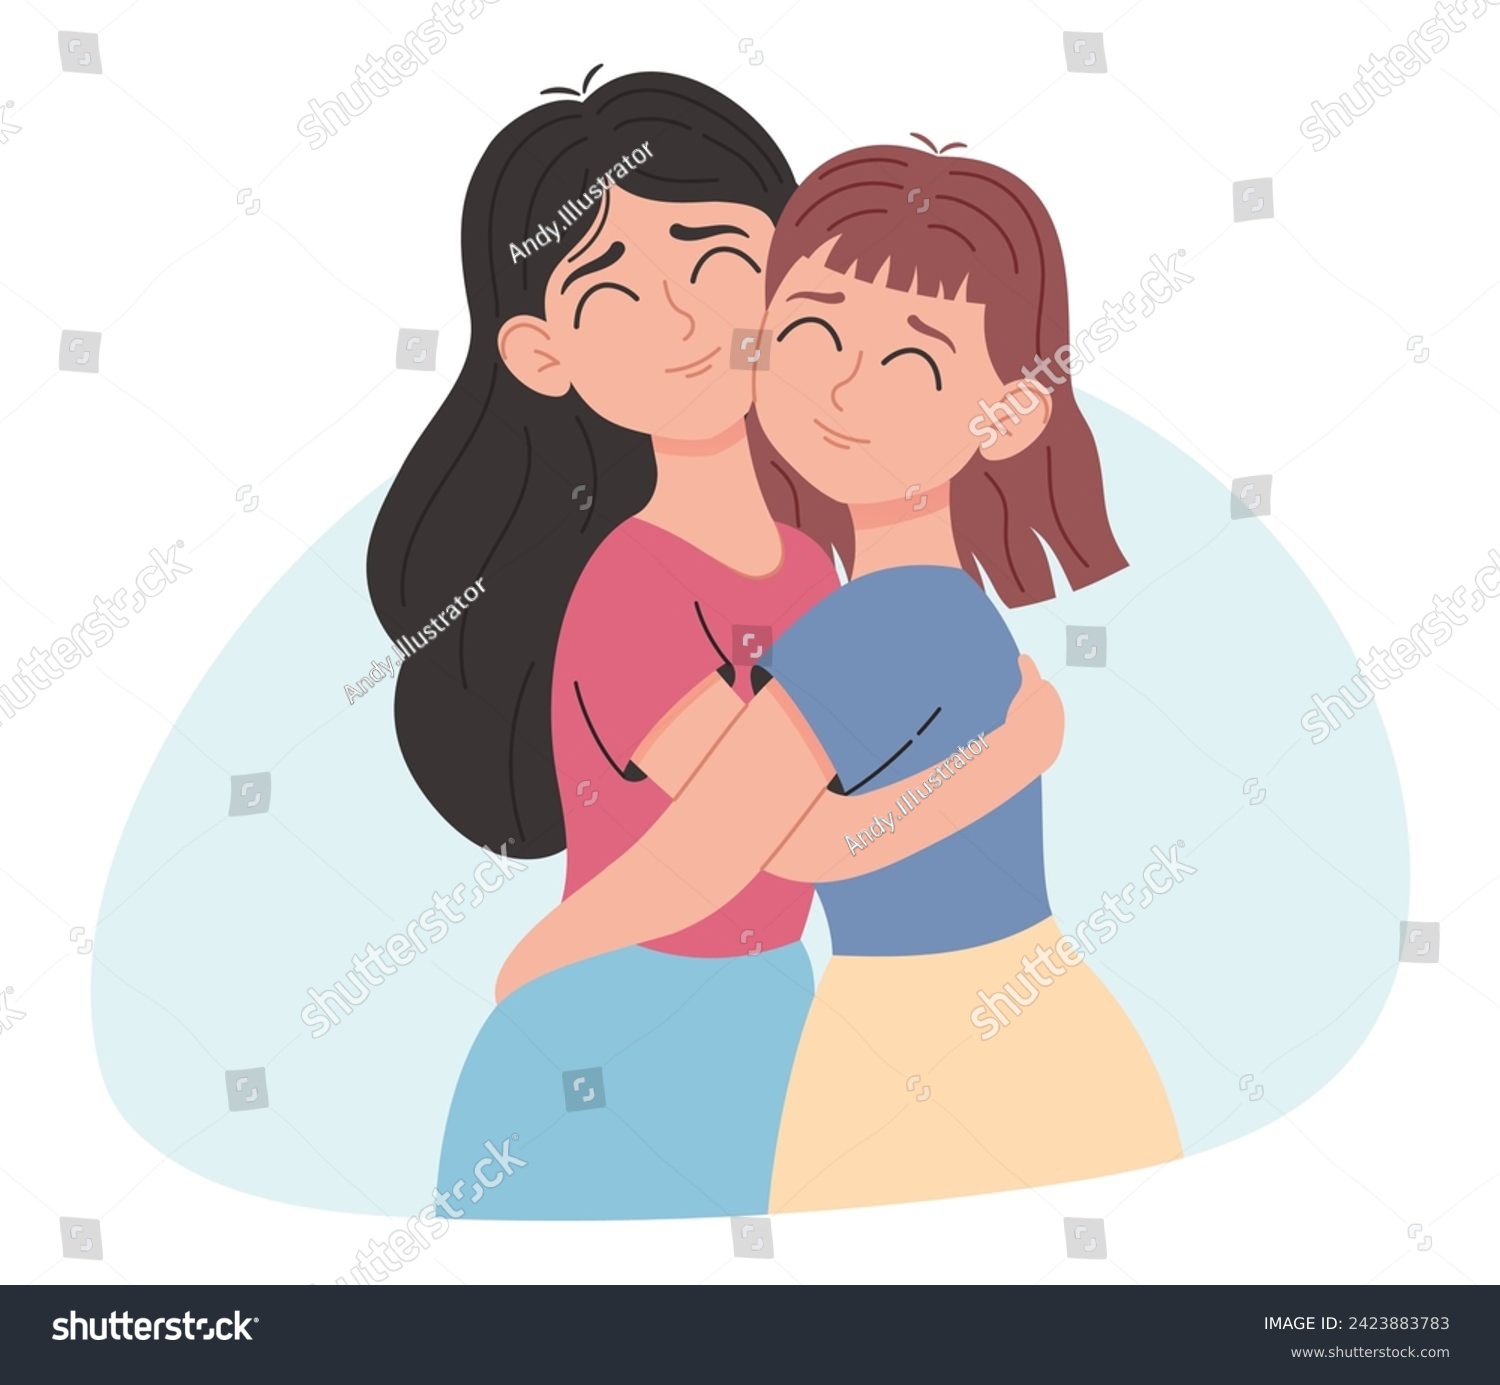 SVG of Girlfriends hugging, friendly hug, caring, illustration isolated on white svg